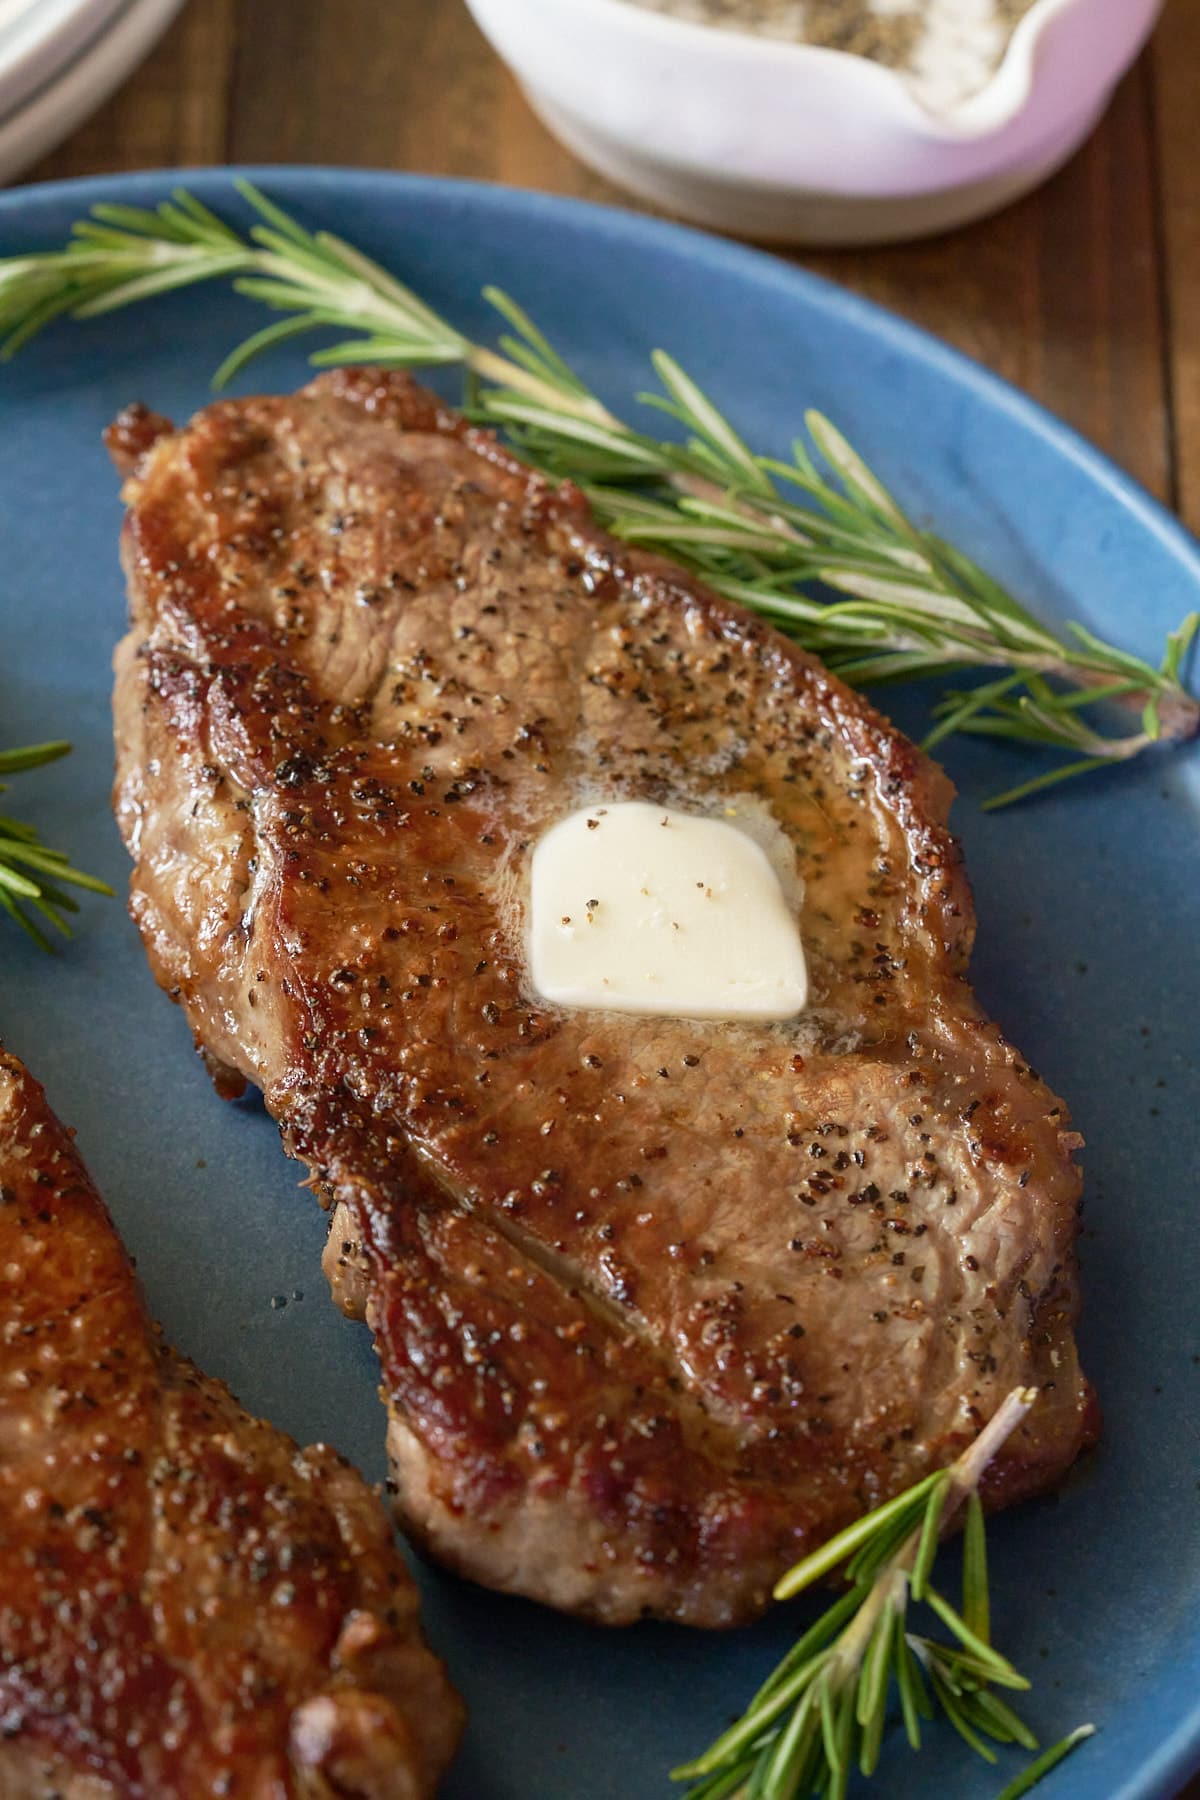 A pan seared sirloin steak, topped with a knob of butter and served on a plate.